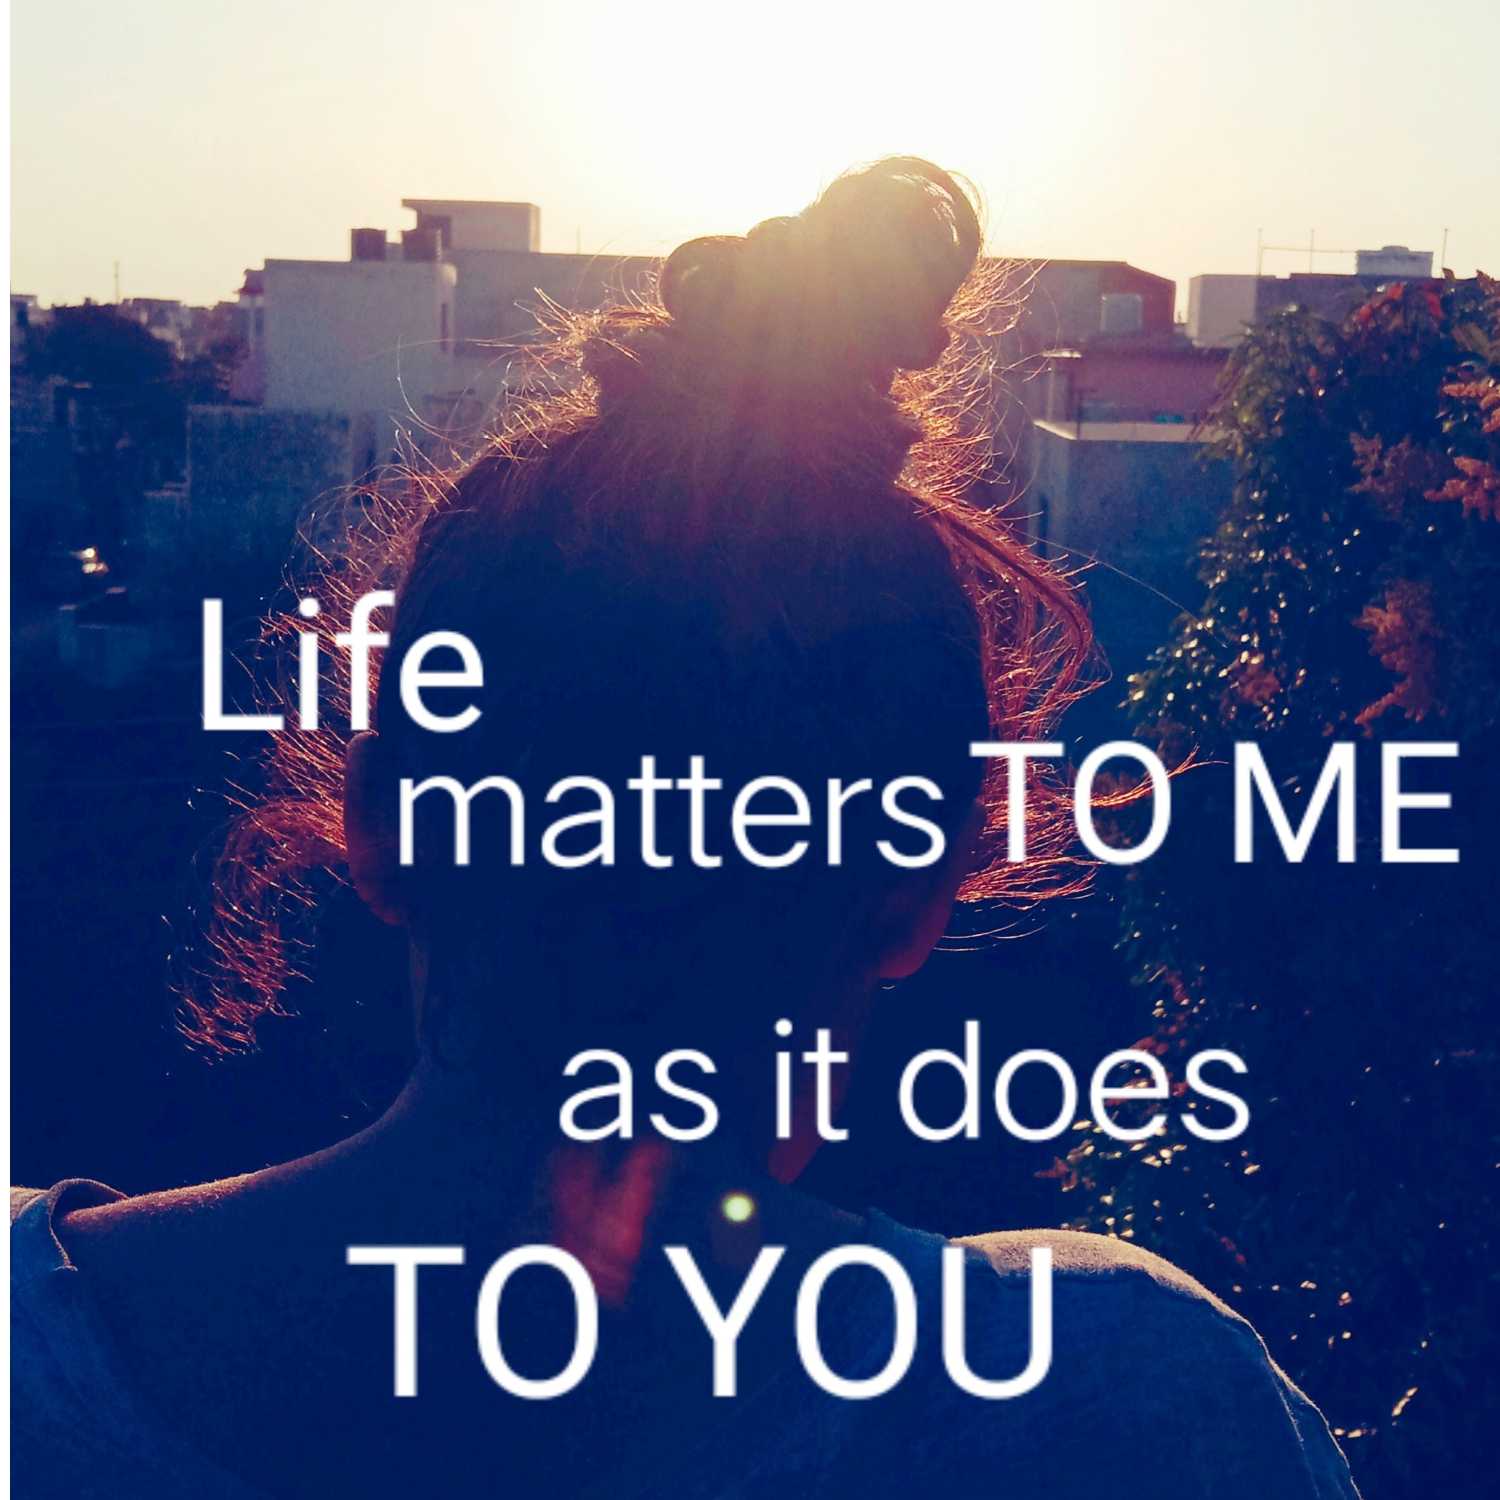 LIFE MATTERS TO ME AS IT DOES TO YOU